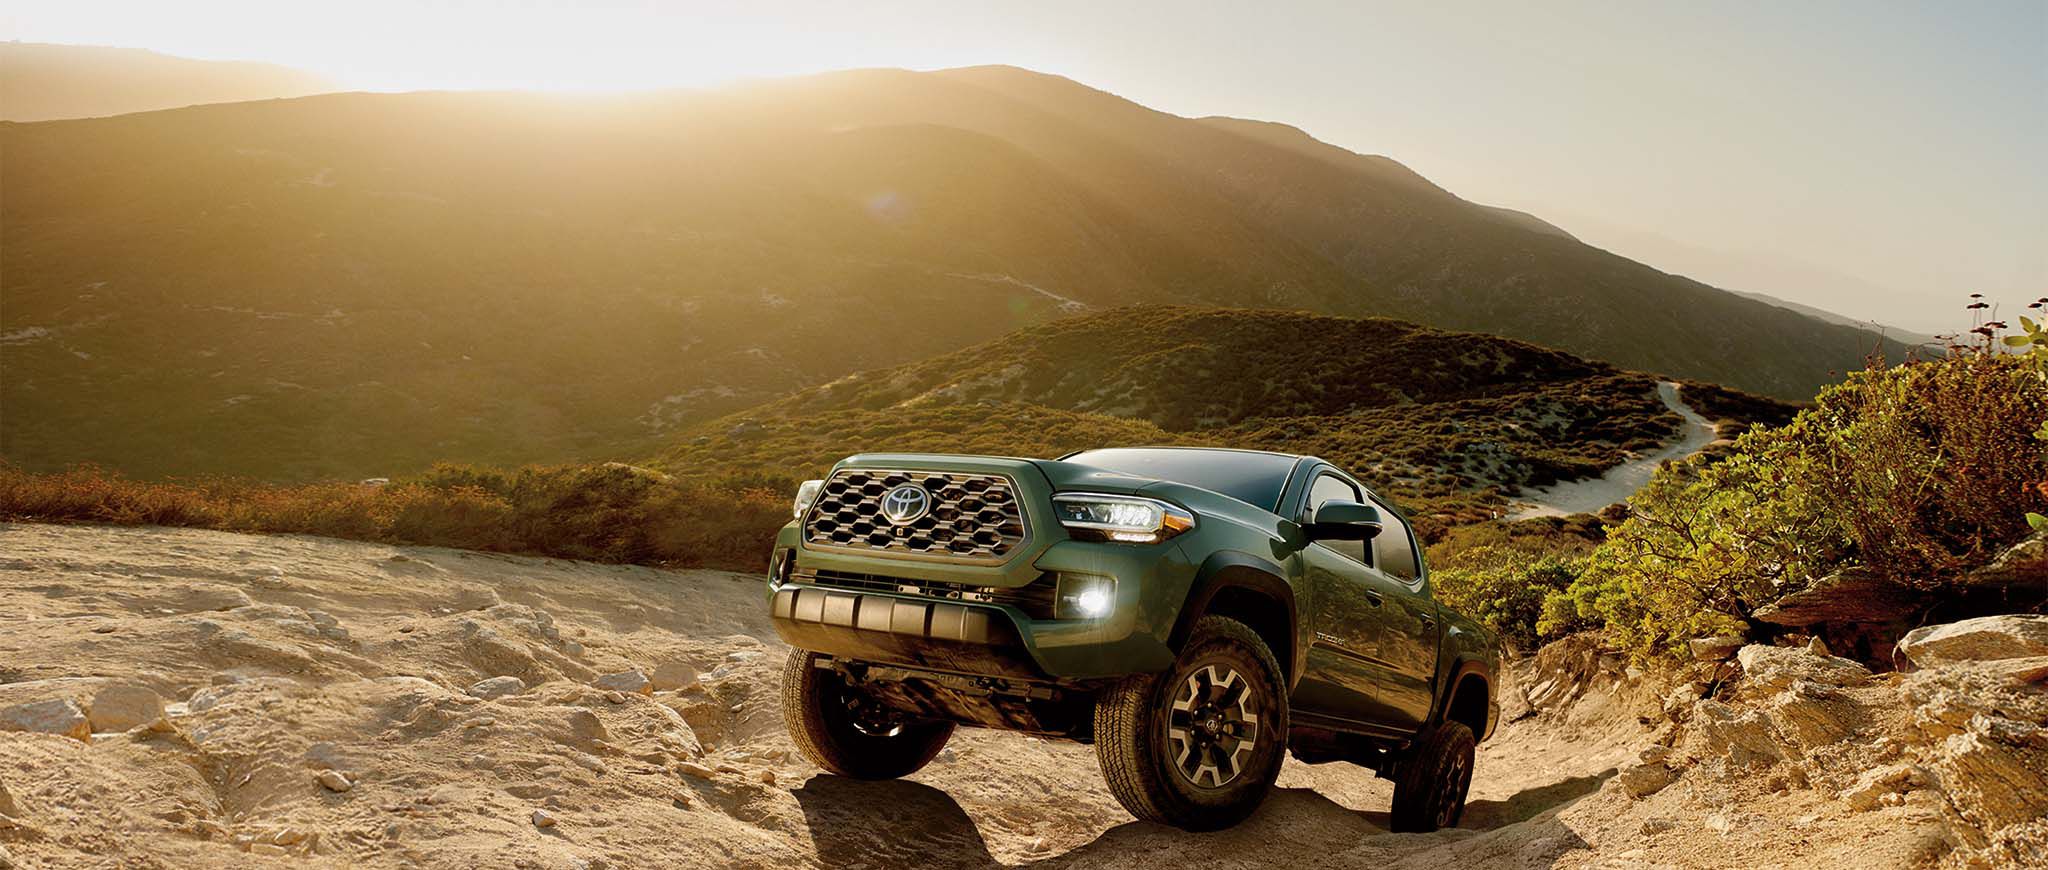 A Tacoma parked by mountains.